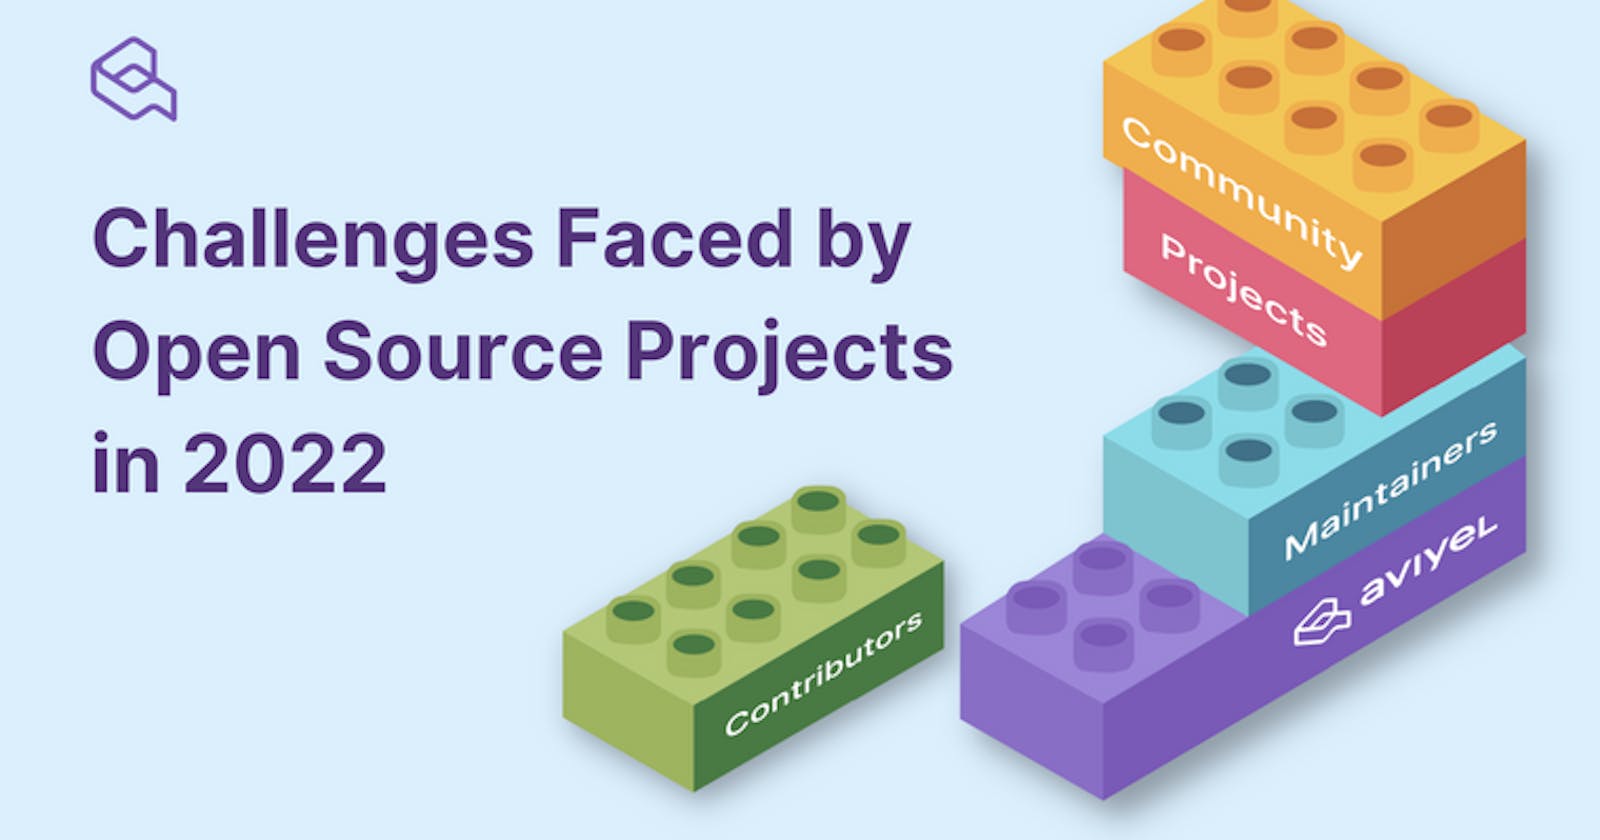 Challenges faced by open source projects in 2022